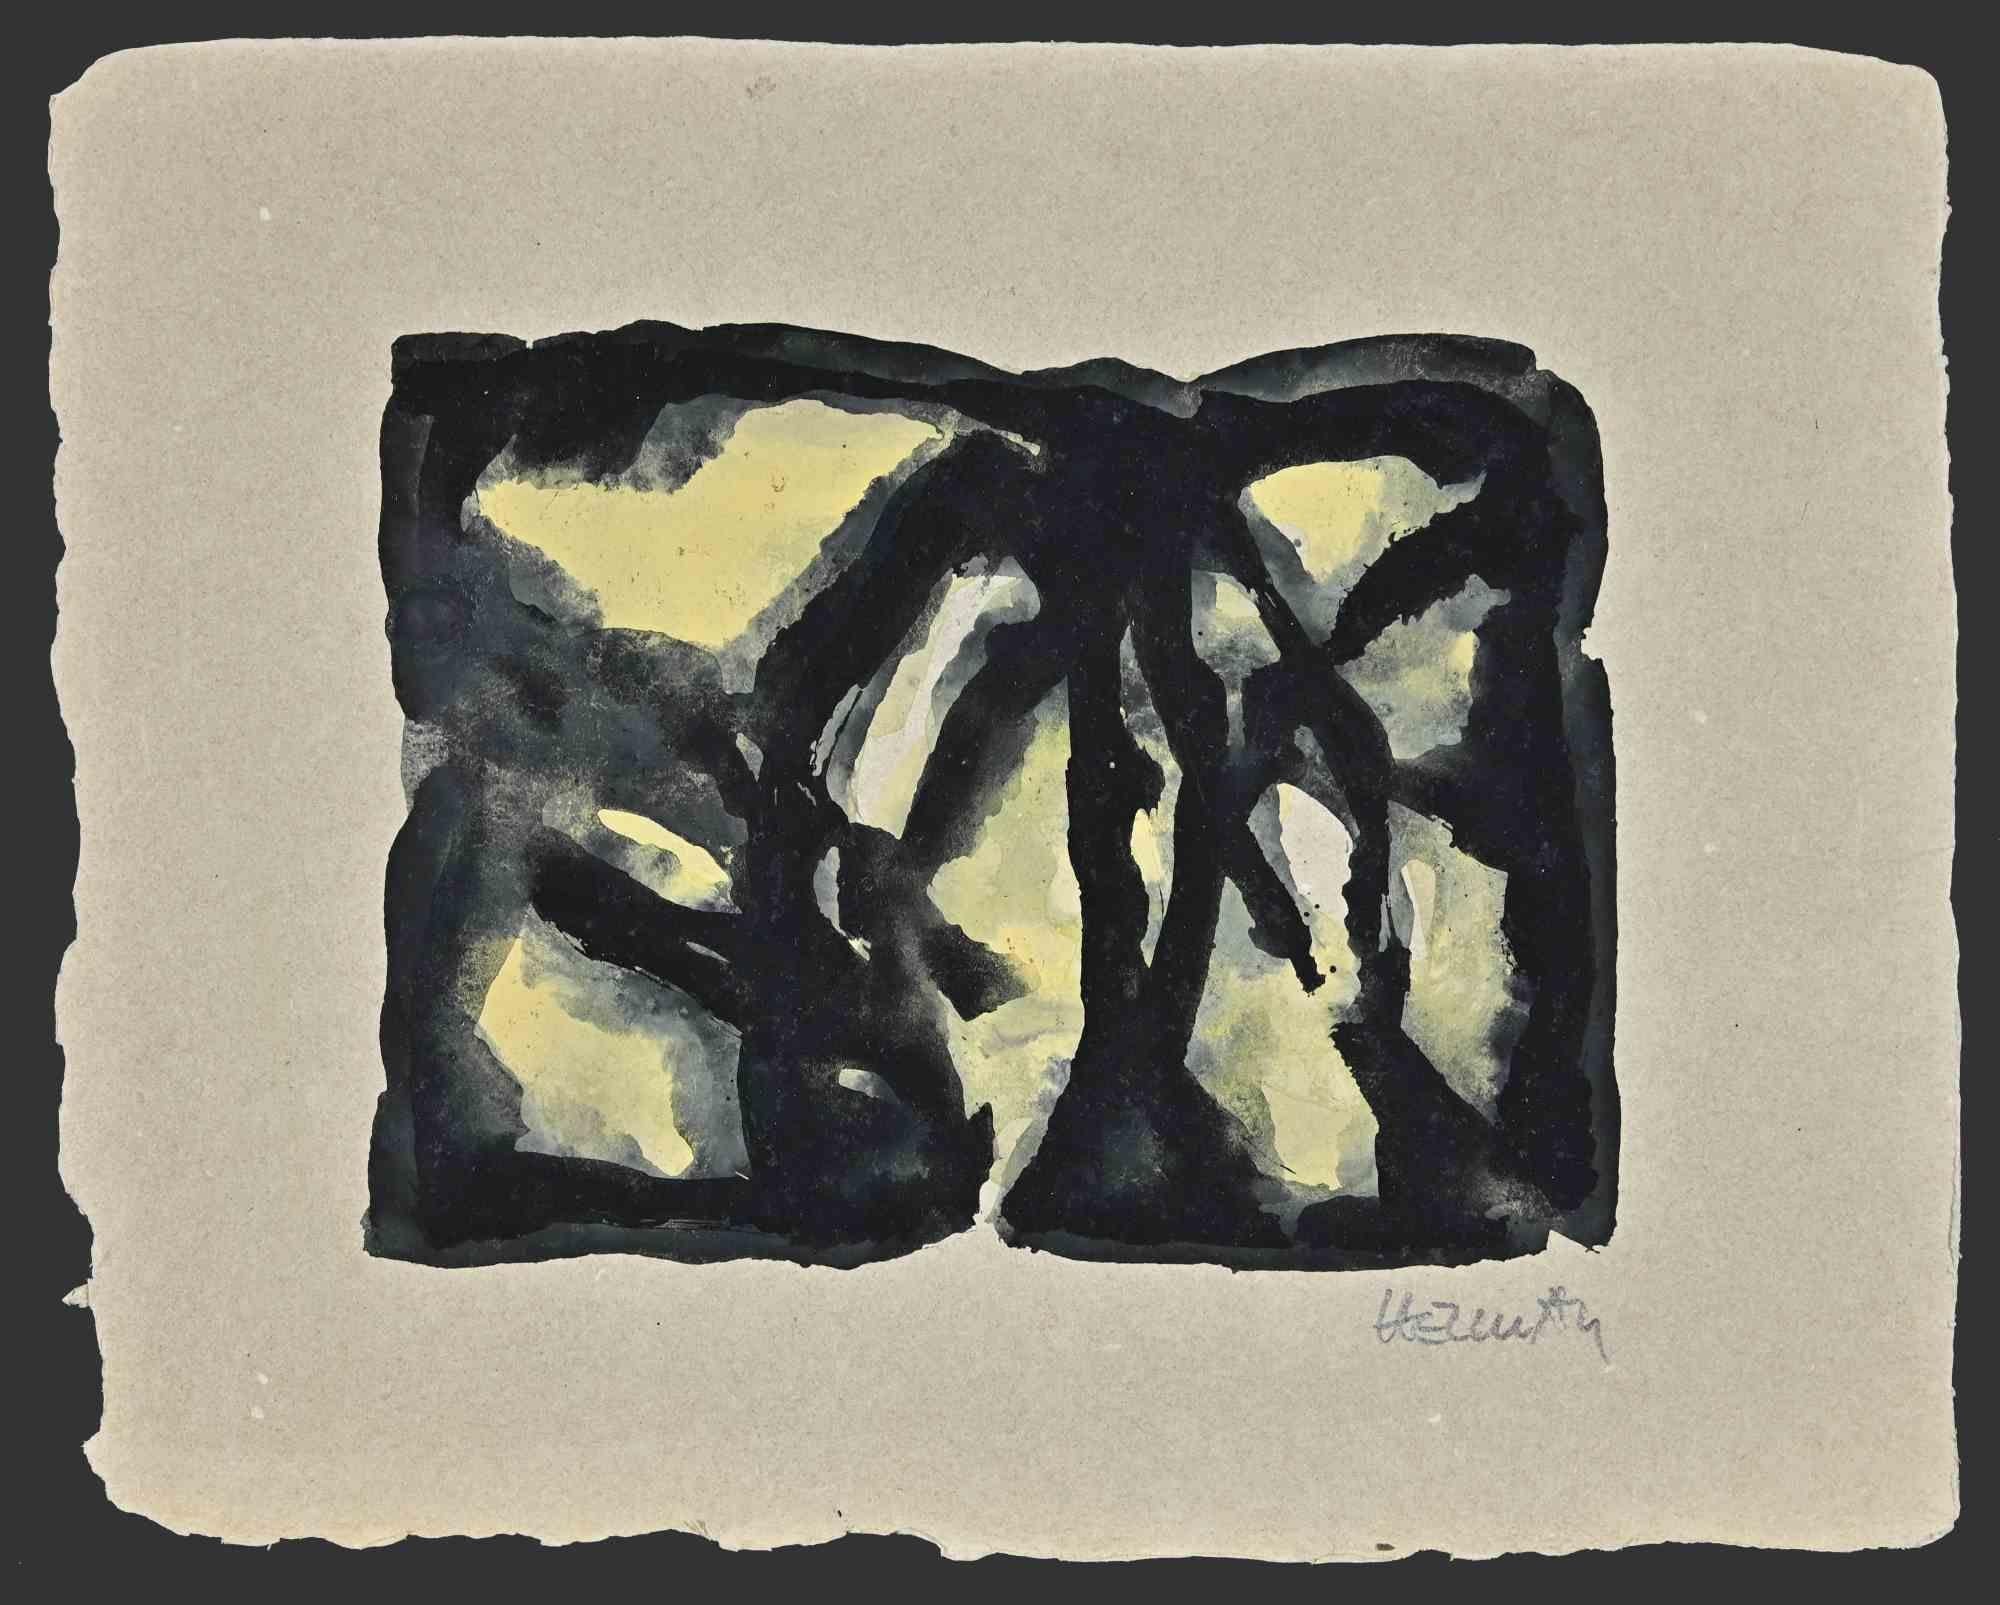 Abstract composition is a contemporary artwork realized by Robert Helman in the late 20th Century.

Watercolor on cardboard.

Hand-signed on the lower right.

Good conditions. The artwork represents an abstract, sublime expression through black and